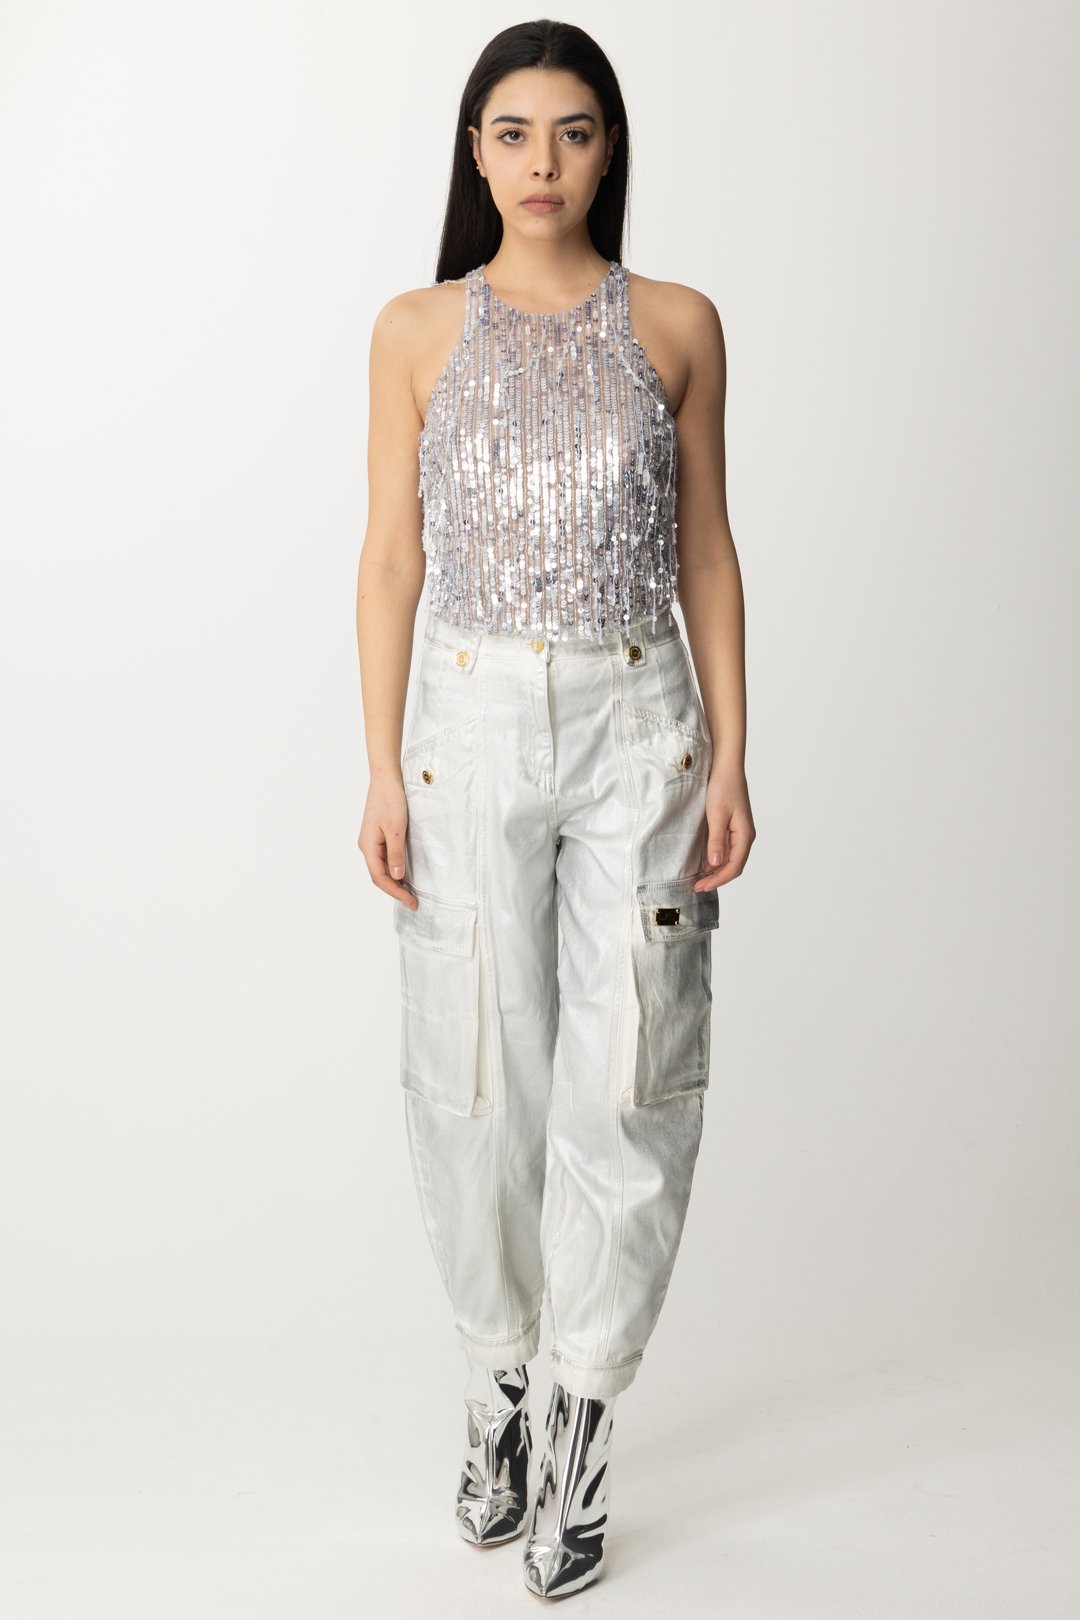 Preview: Elisabetta Franchi Crop top with beaded fringes Silver